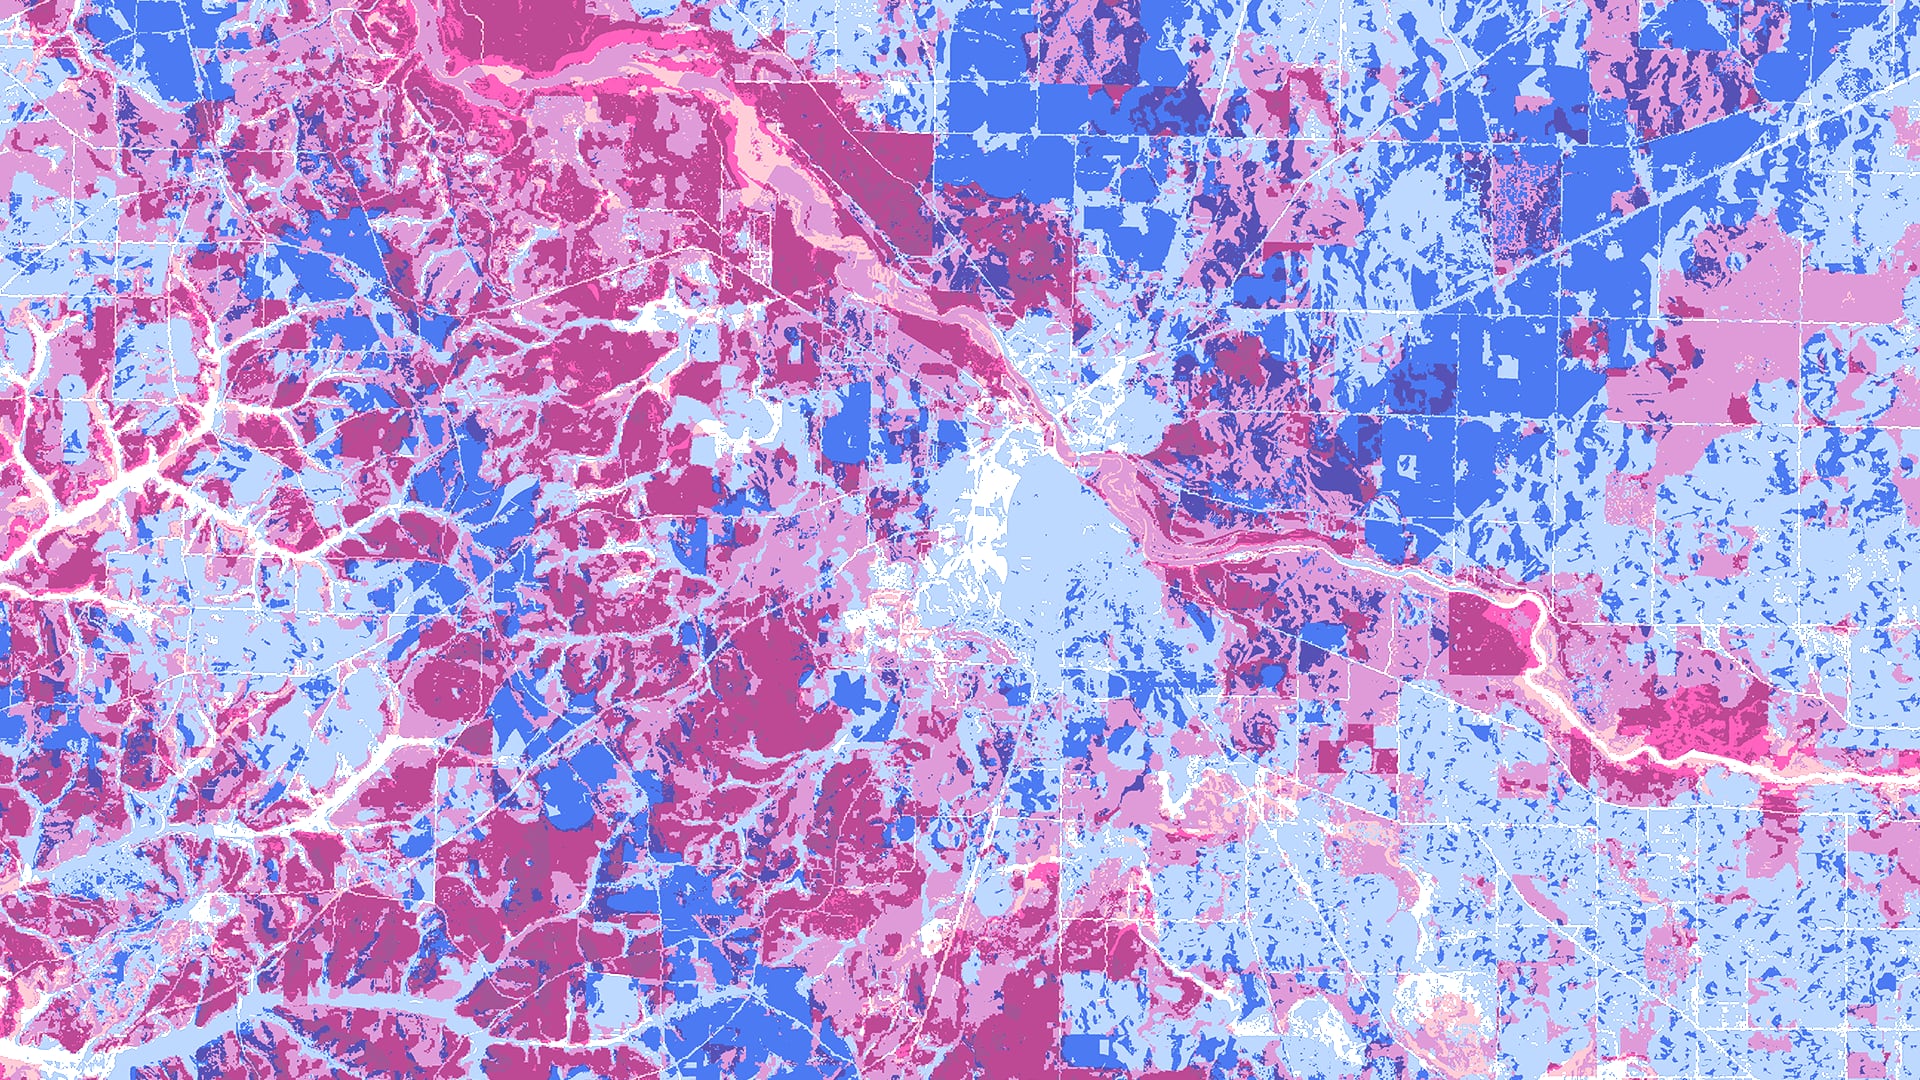 Solar insolation levels collected by Terra/Aqua Clouds and the Earth's Radiant Energy System (CERES) in 2019 were used as inputs for solar suitability and environmental sensitivity conflict maps to inform solar developers of overlap between areas desirable for solar farms and nearly threatened species habitats. The darkest magenta designates the most environmentally sensitive areas, the darkest shade of blue indicates the highest level of solar suitability, while levels of conflict are shown in shades of purple.   Keywords: LUCIS, CERES, Solar Energy, Georgia, Samantha Trust​